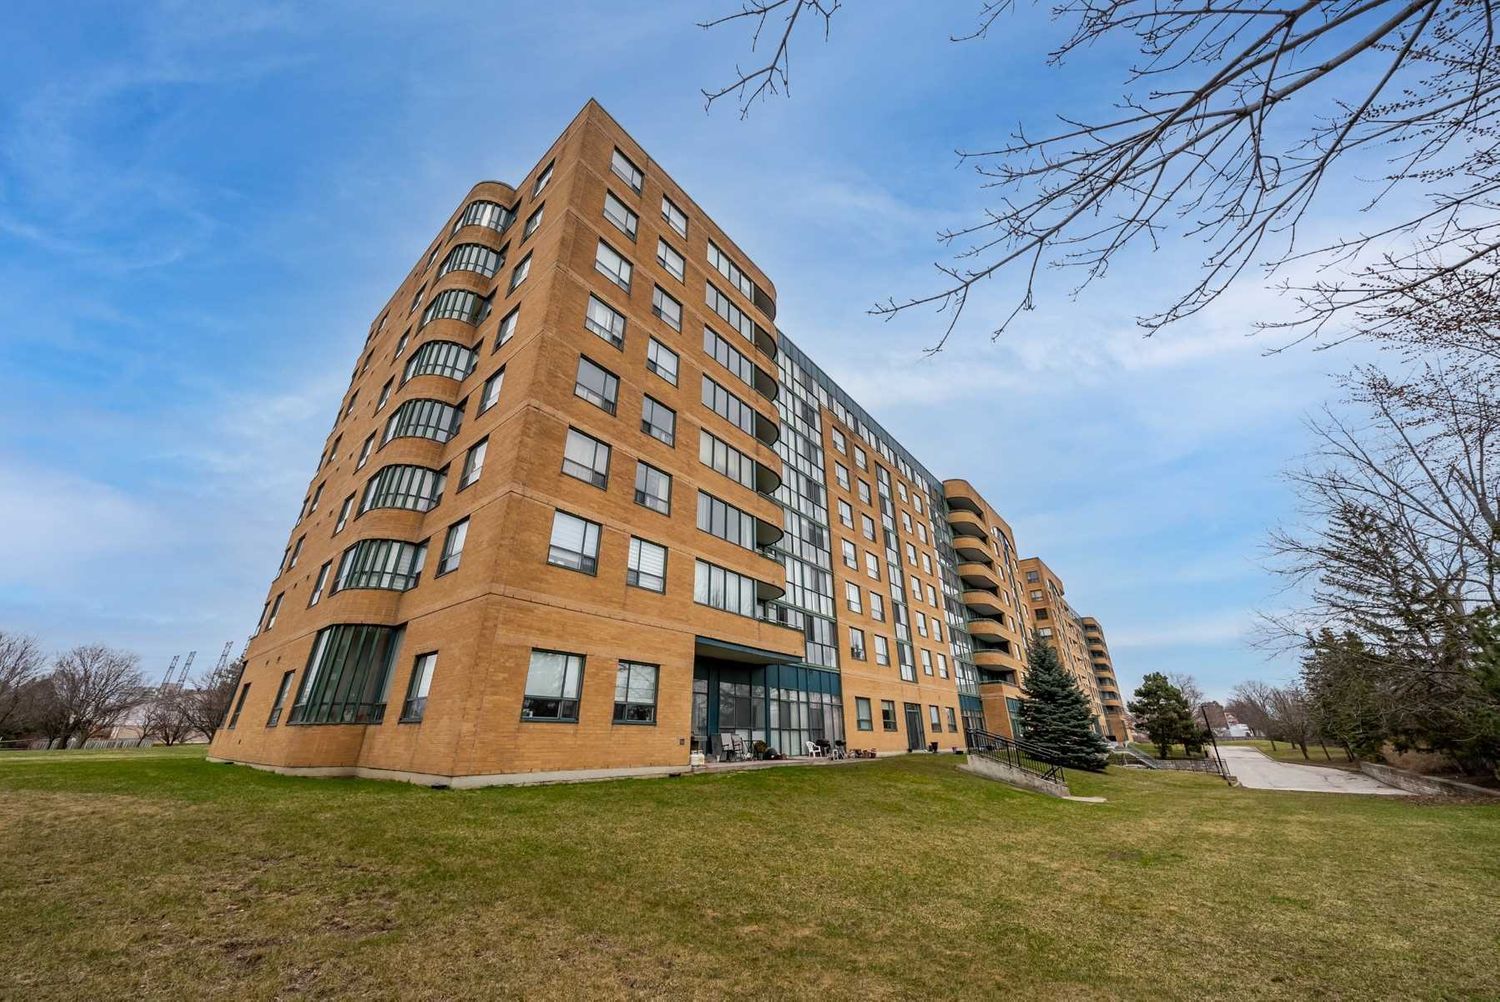 1655 Pickering Parkway. Emerald Point Condos is located in  Pickering, Toronto - image #1 of 2